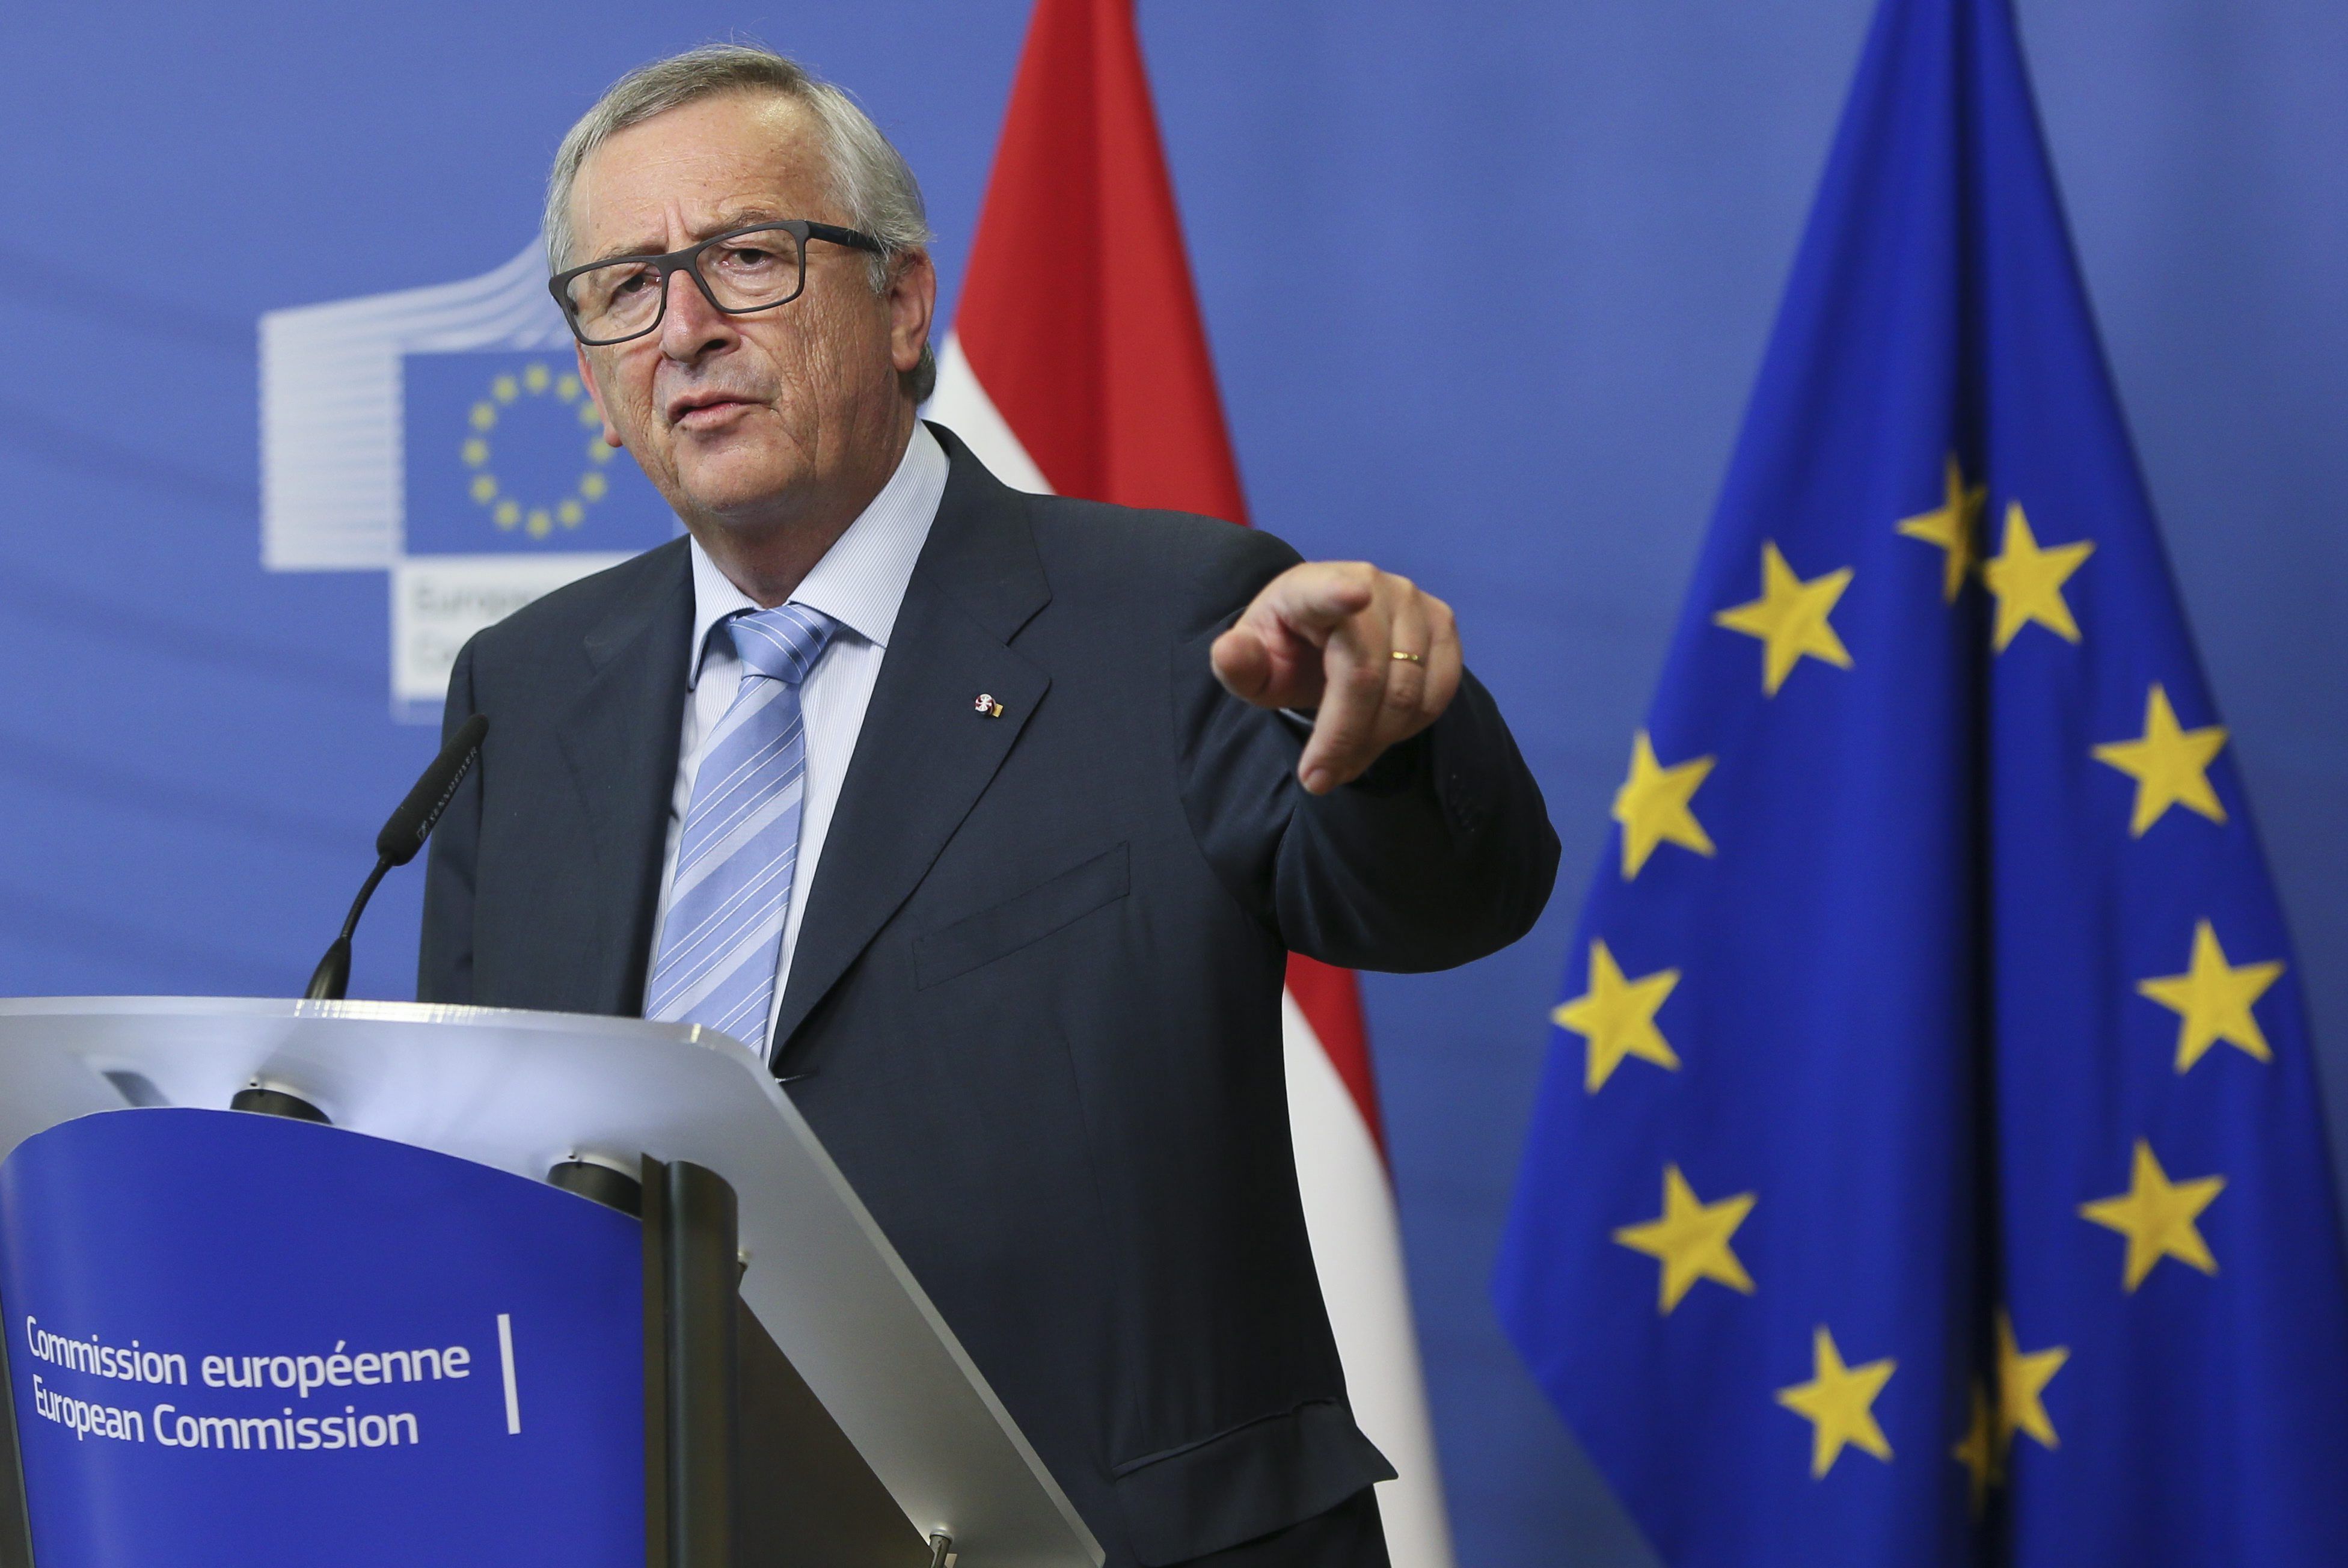 Juncker, Tusk call on Rajoy to avoid violence and negotiate